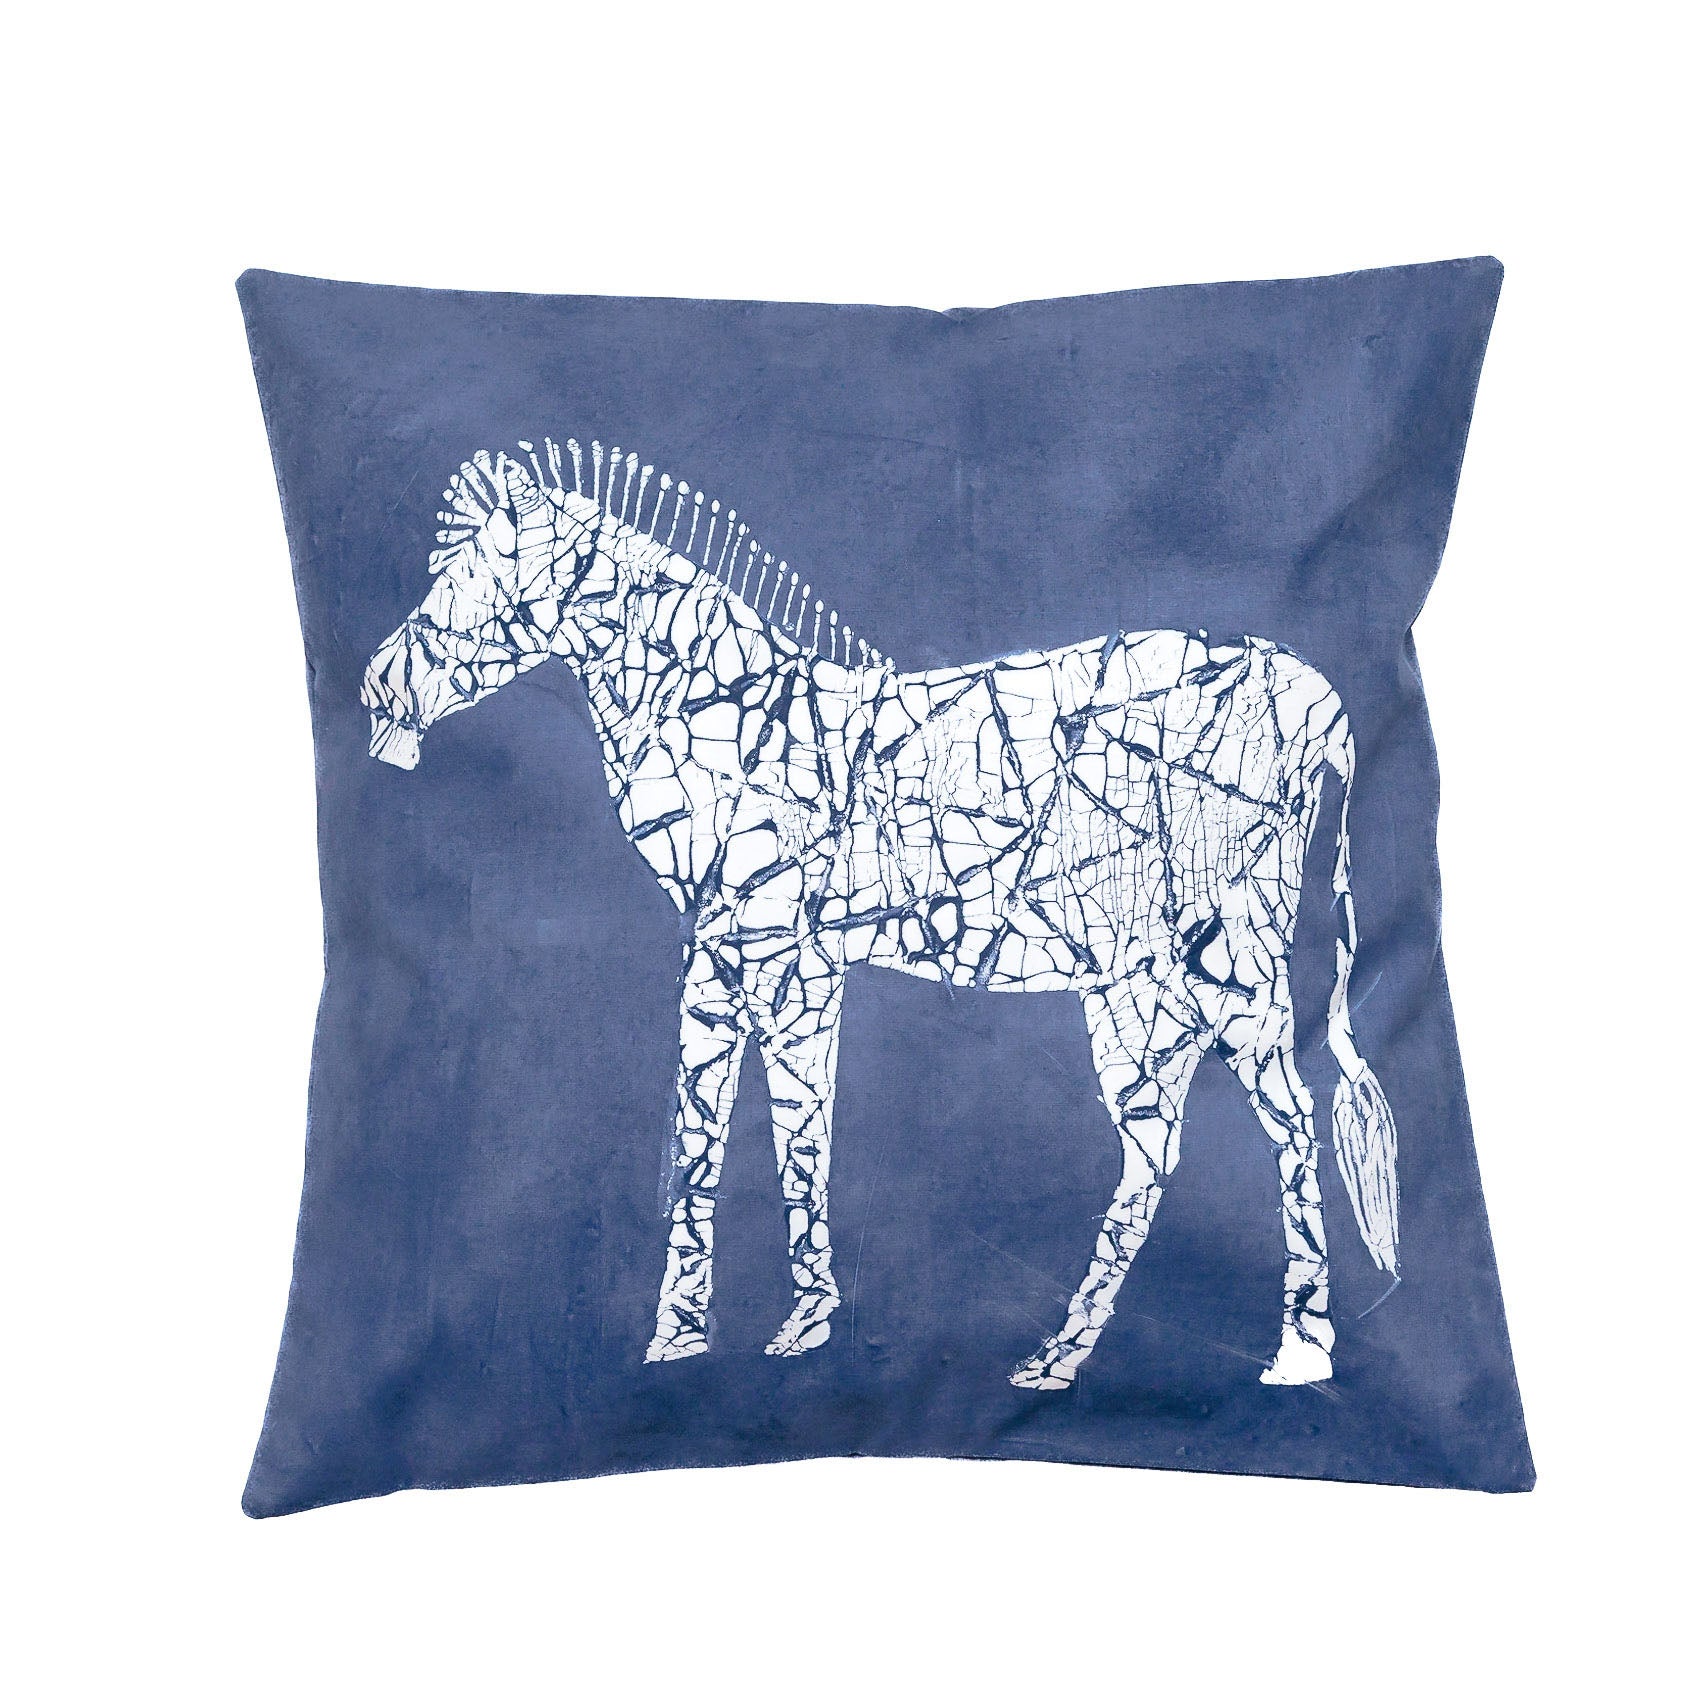 Safari Zebra Cushion Cover in Cornflower Blue, Hand Painted by TRIBAL TEXTILES - ethical Home Decor Interiors